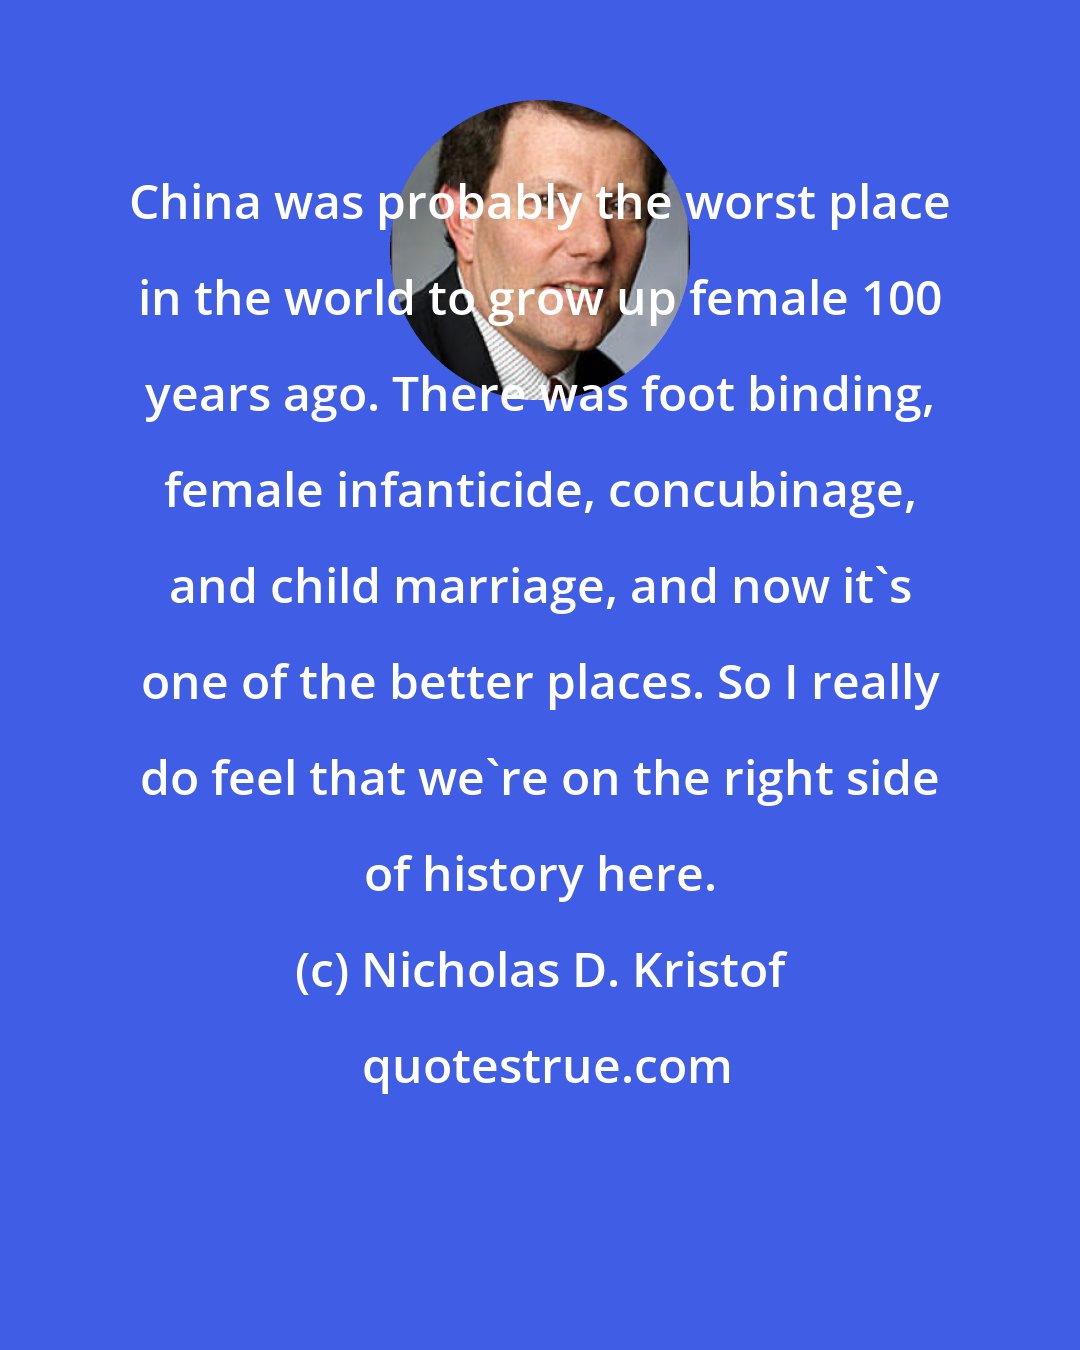 Nicholas D. Kristof: China was probably the worst place in the world to grow up female 100 years ago. There was foot binding, female infanticide, concubinage, and child marriage, and now it's one of the better places. So I really do feel that we're on the right side of history here.